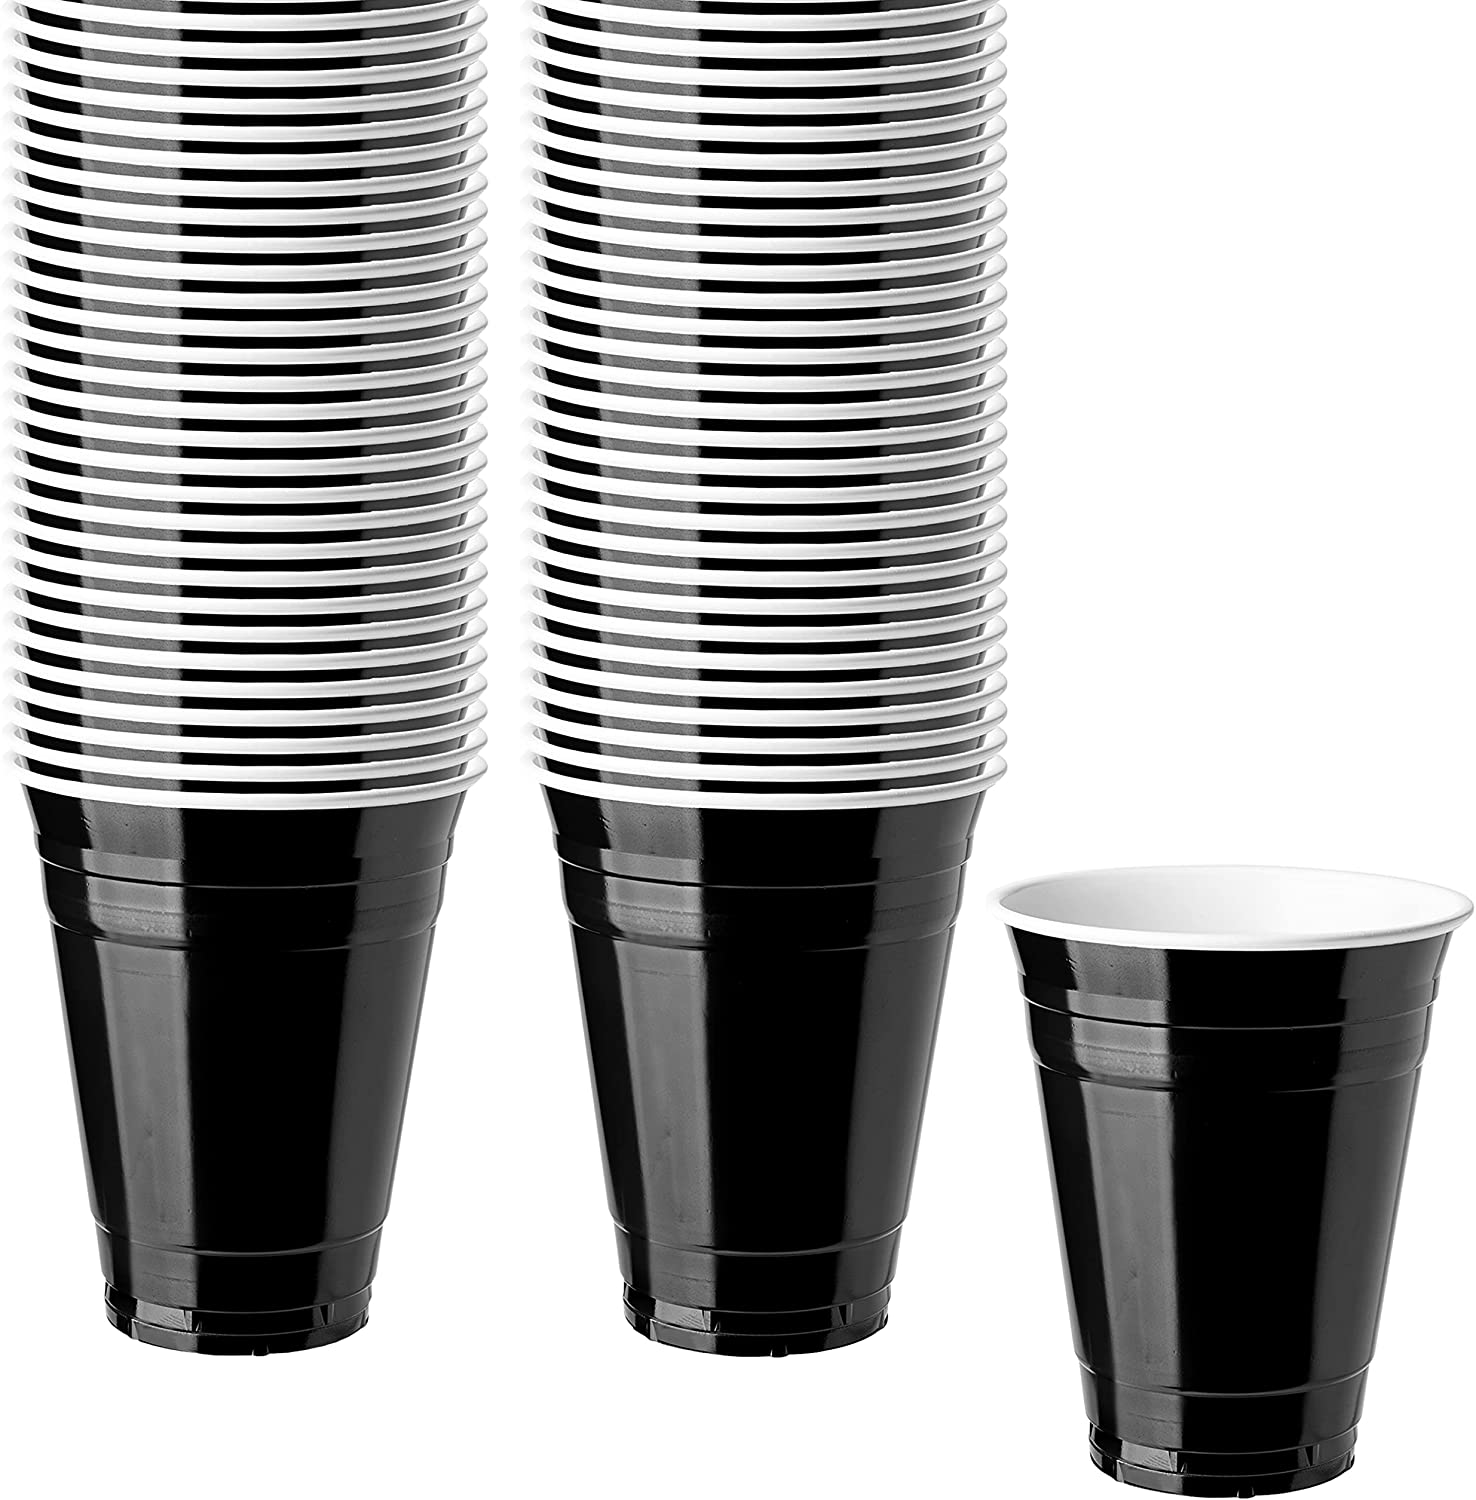 White 16 oz Plastic Cups for 50 Guests